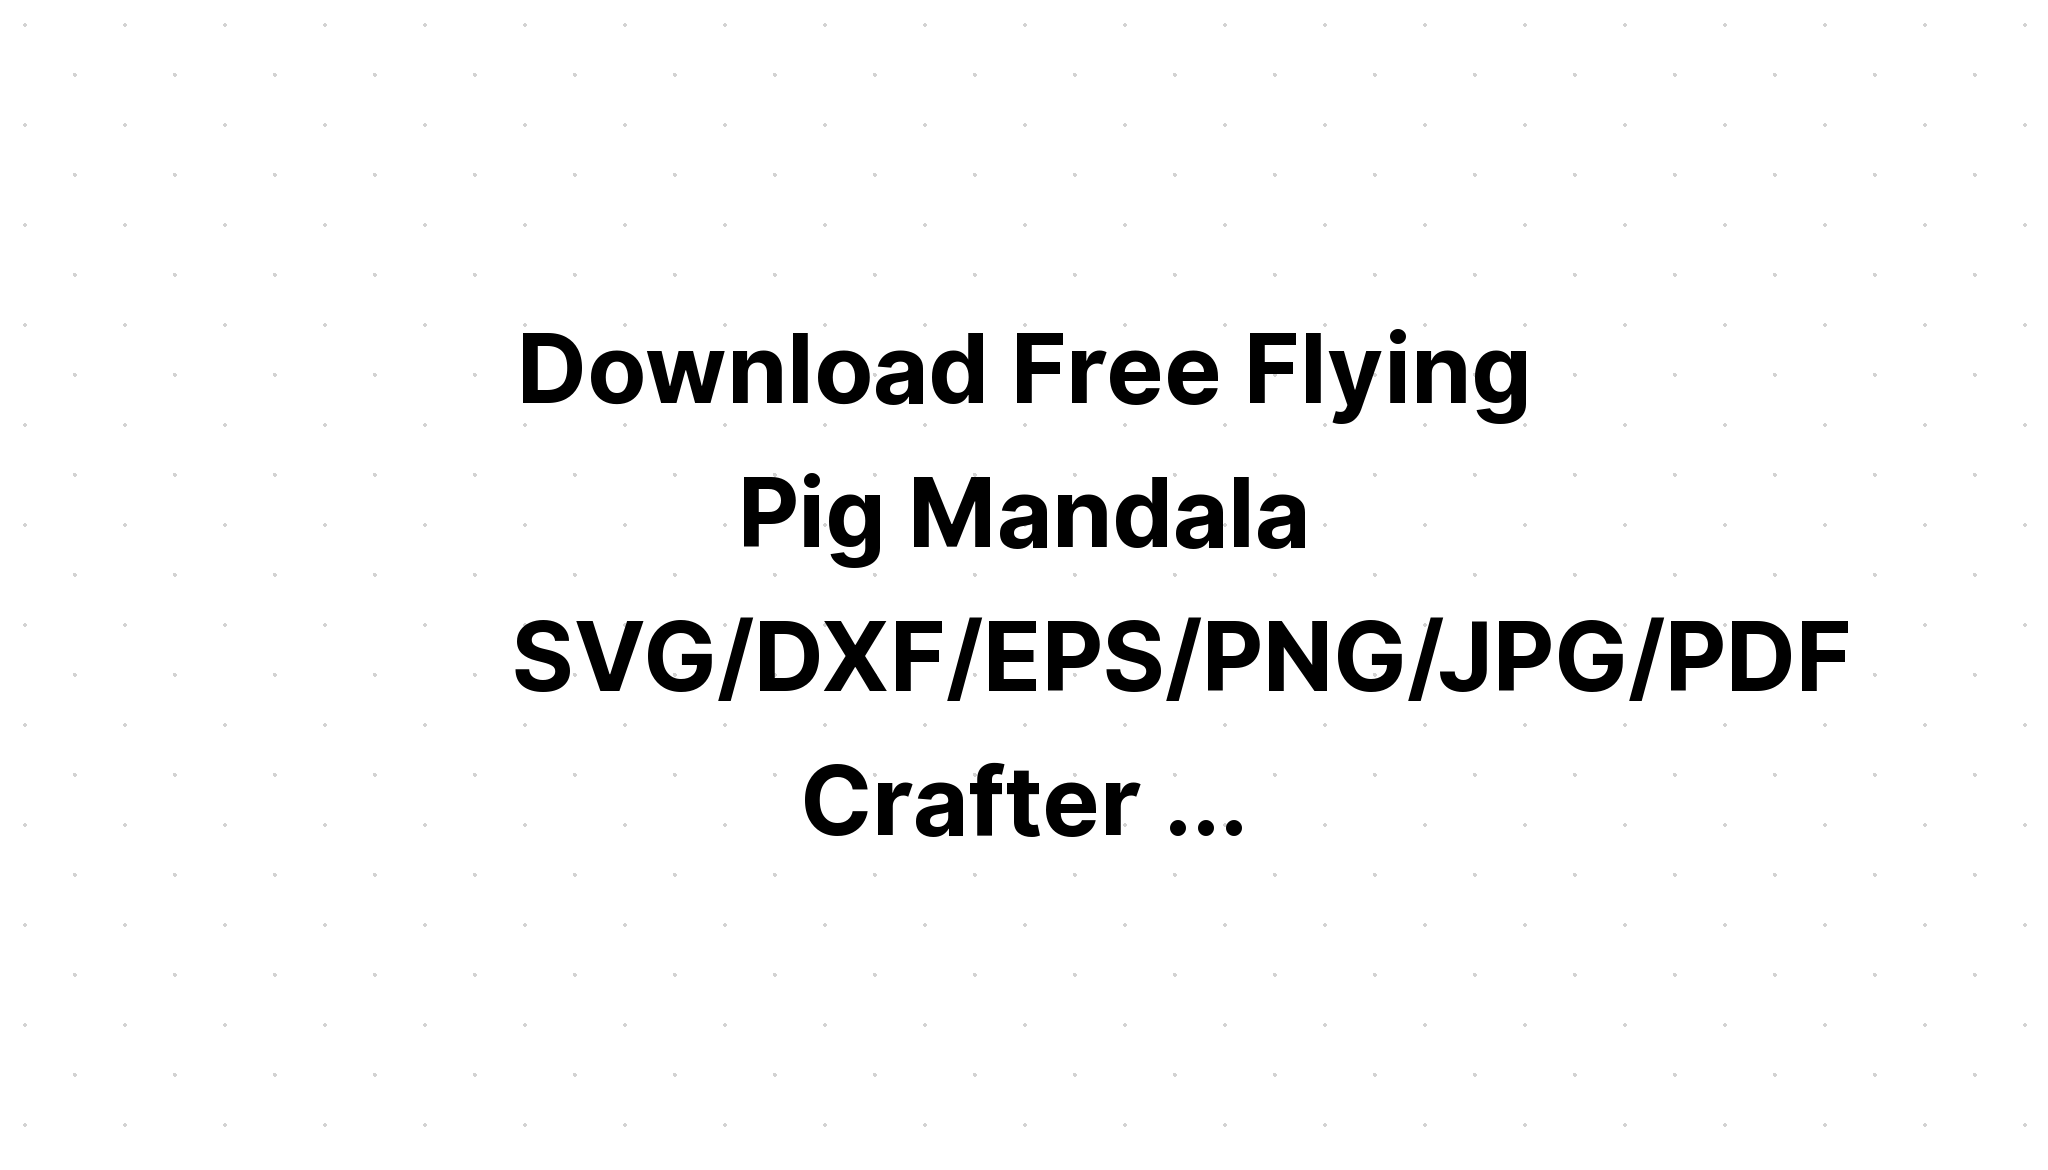 Download Pig Mandala Svg Free For Silhouette - Layered SVG Cut File